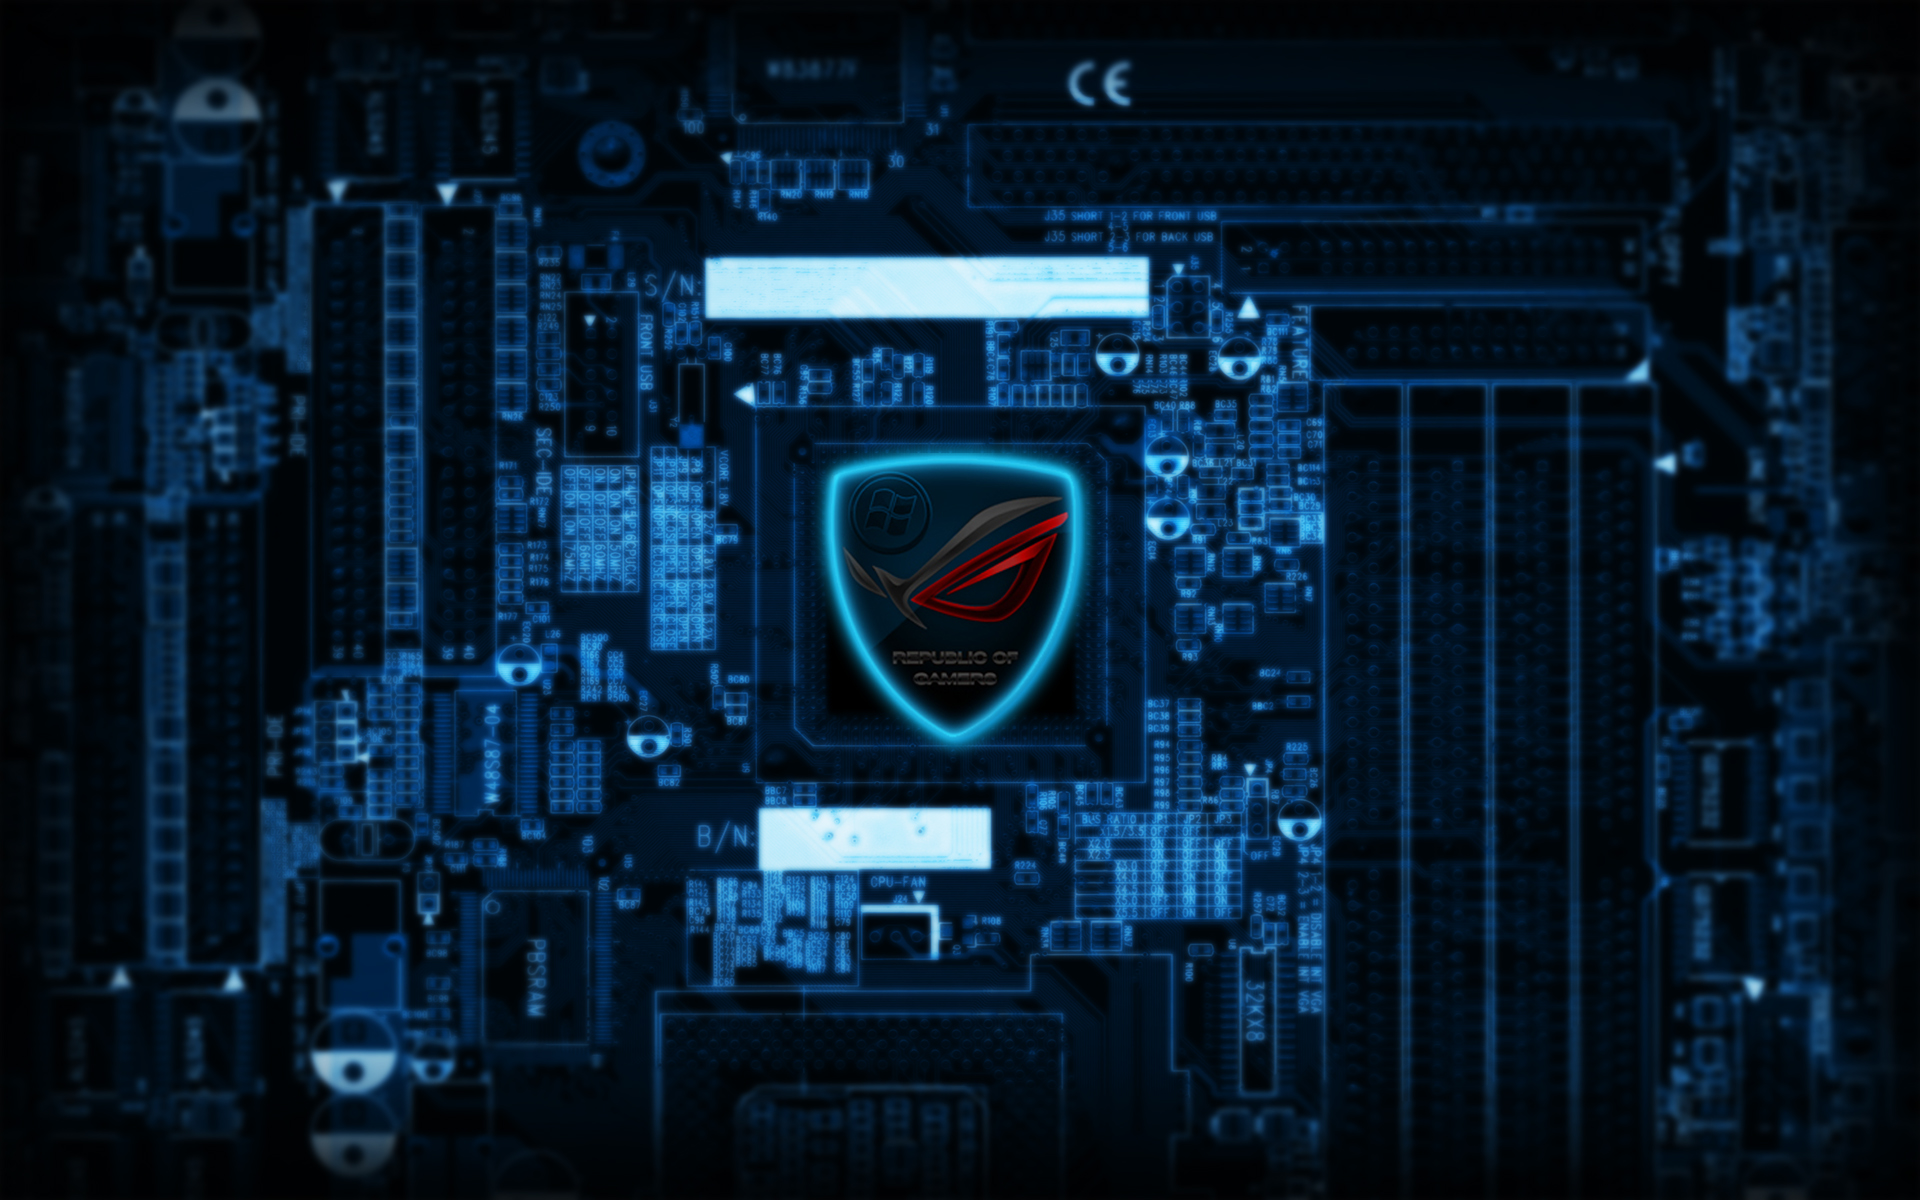 Asus Chip Wallpaper. - Page 2